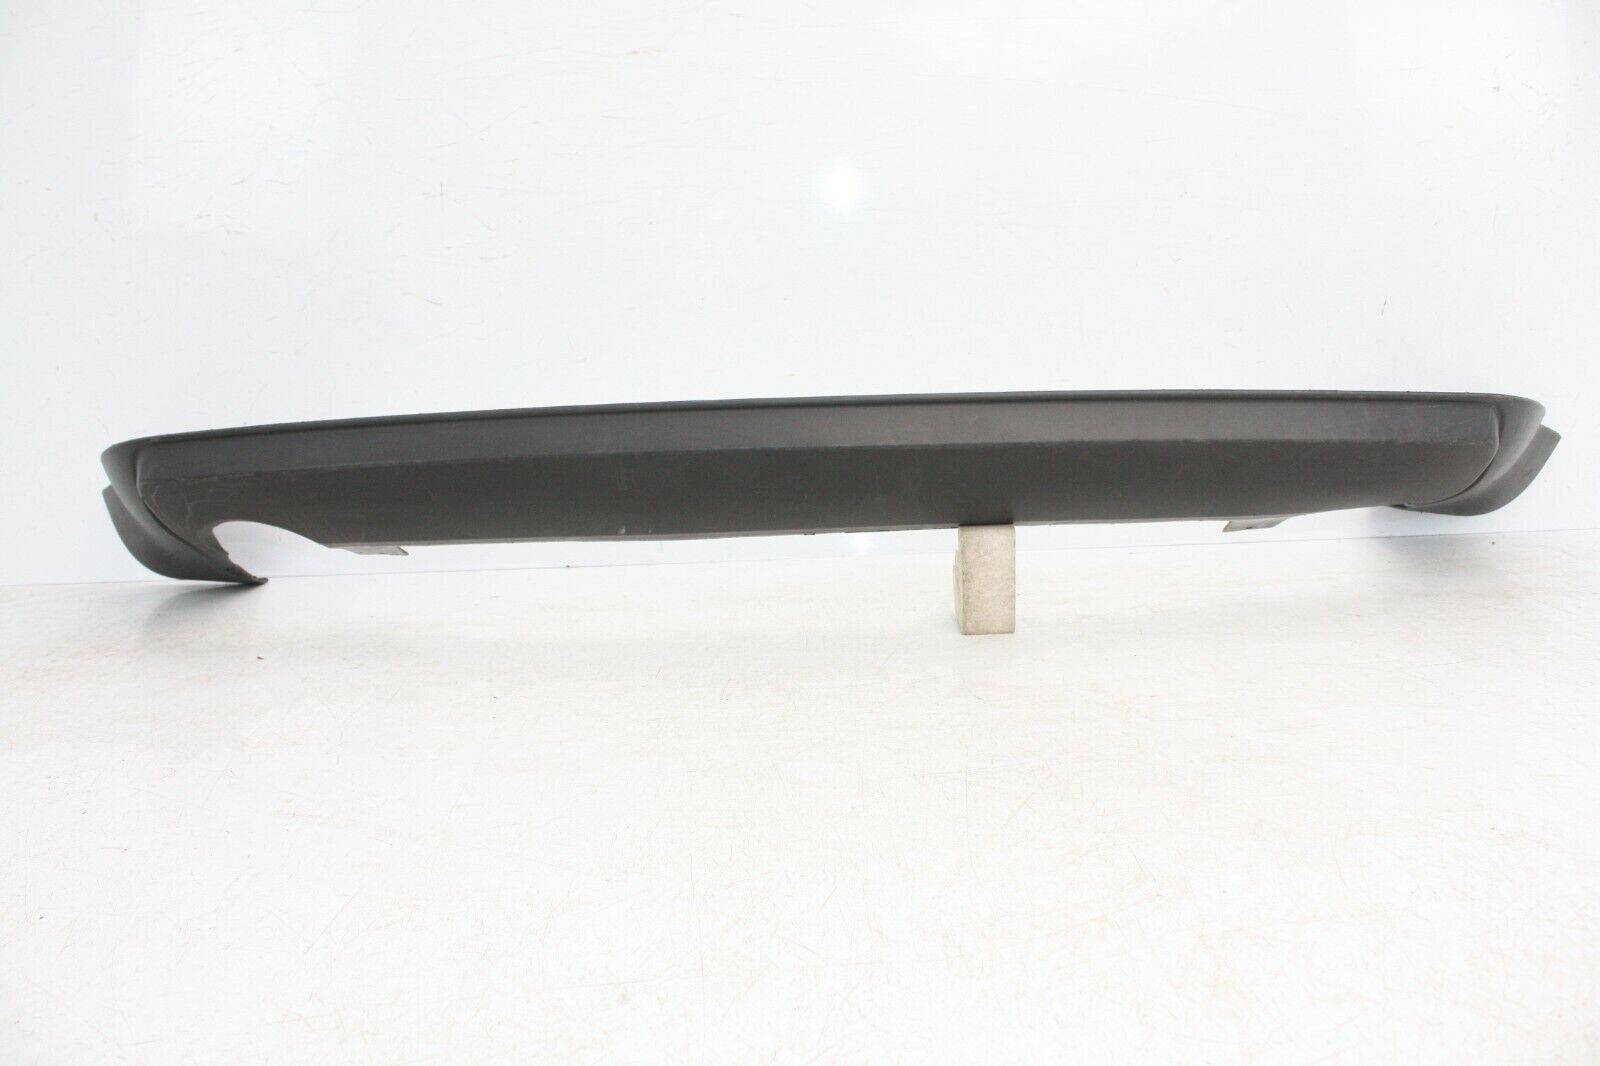 Ford-C-Max-Rear-Bumper-Lower-Section-2004-To-2007-3M51-R17A894-AB-175902867116